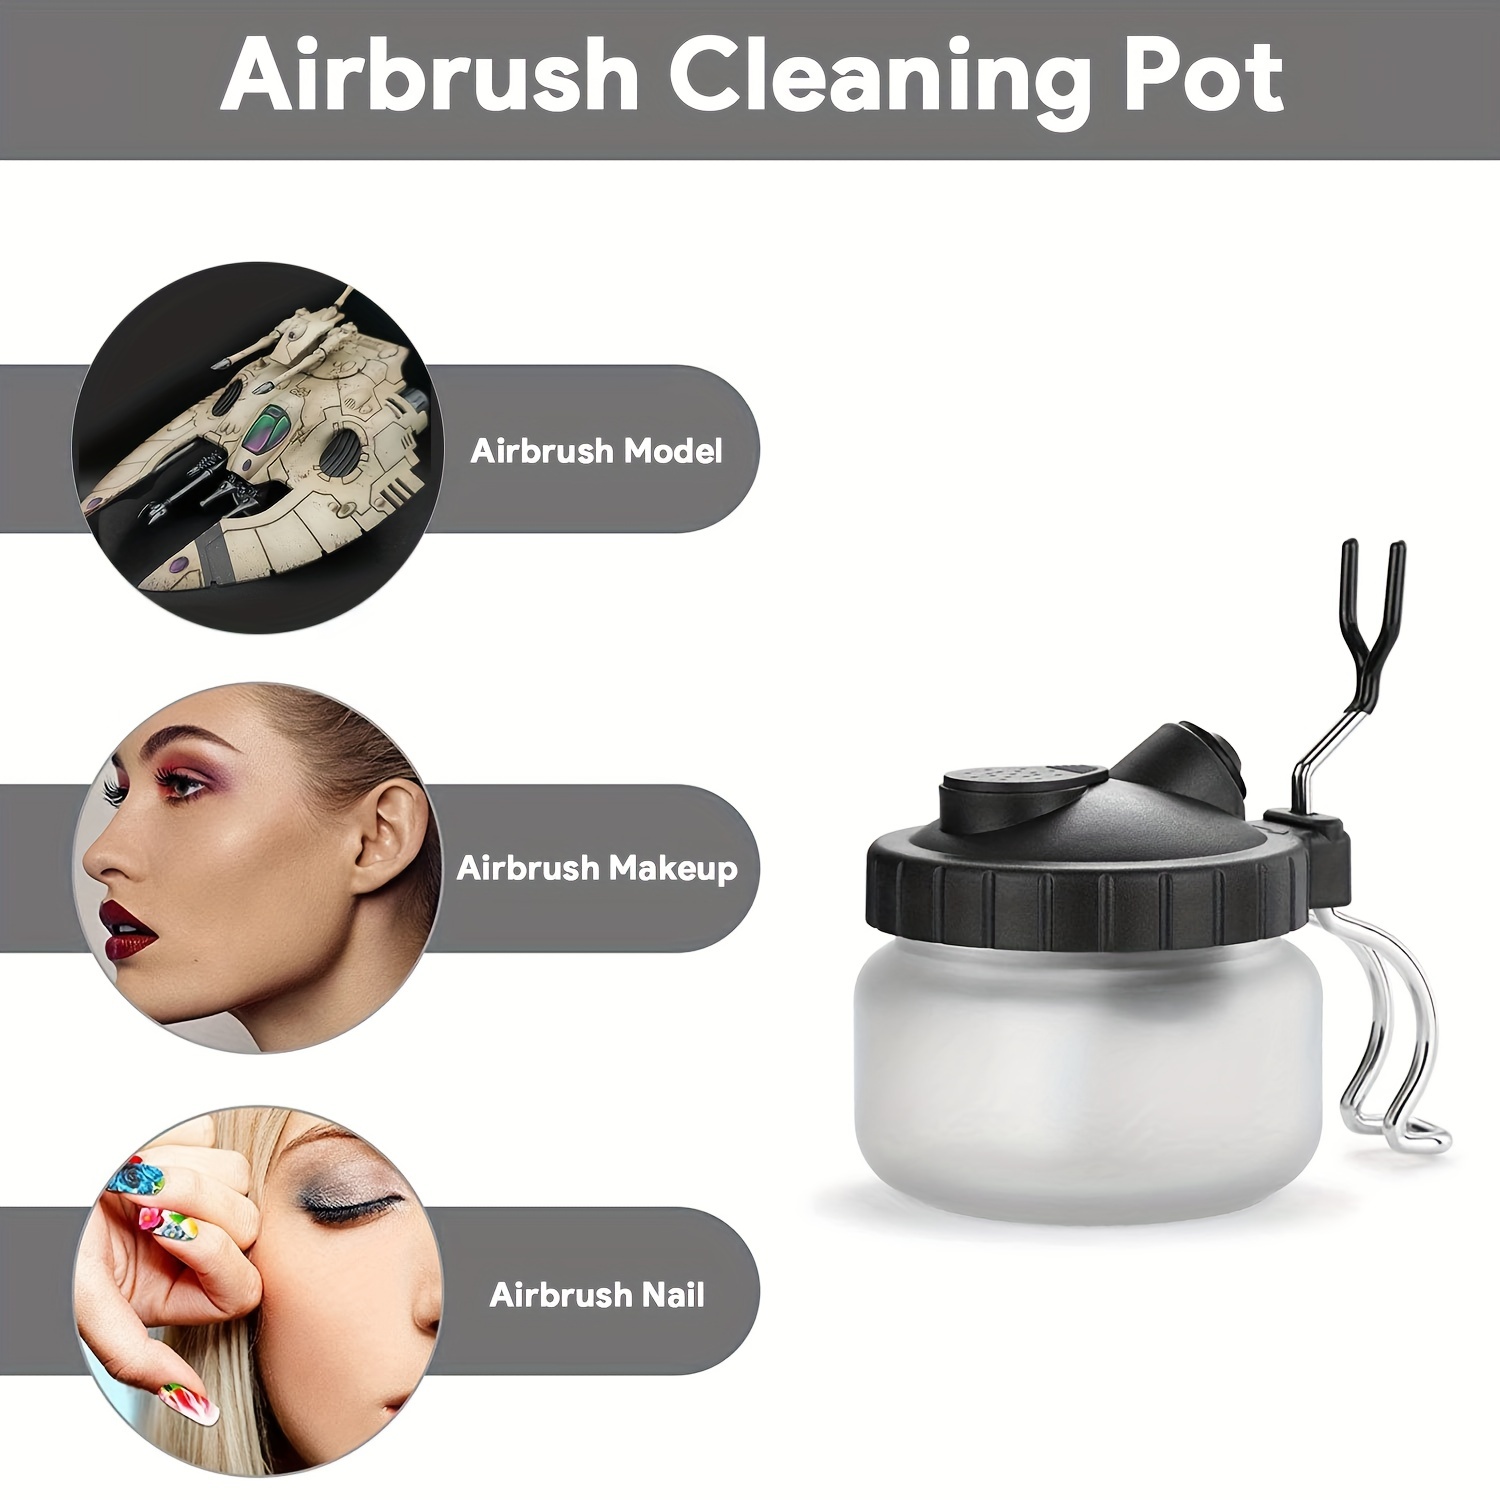 Ninesteps Airbrush Cleaning Pot Hints